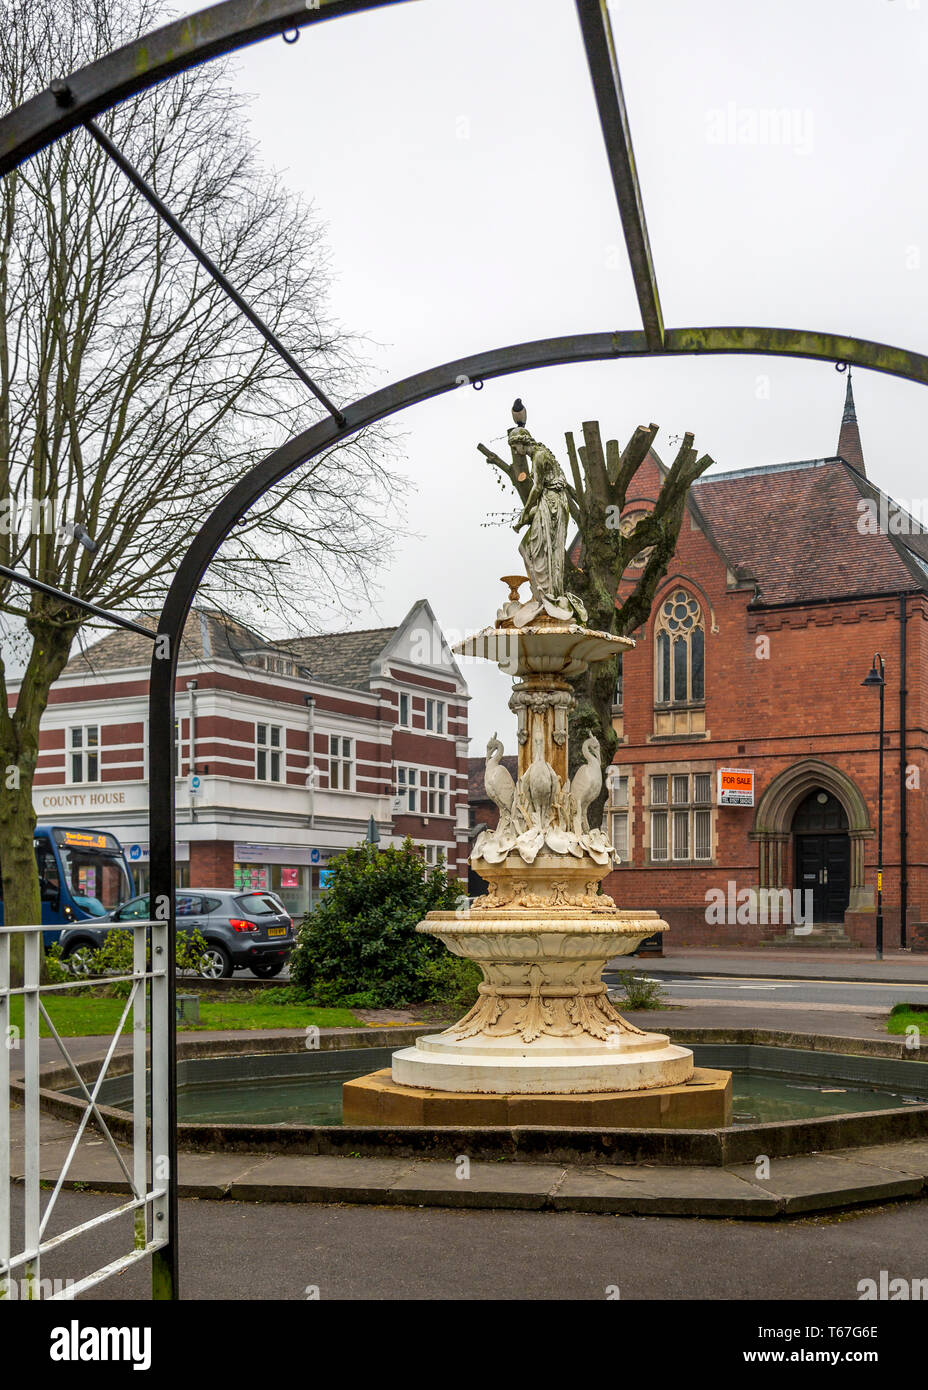 Bartleet Fountain in Redditch Town Centre, Worcestershire, England. Stock Photo